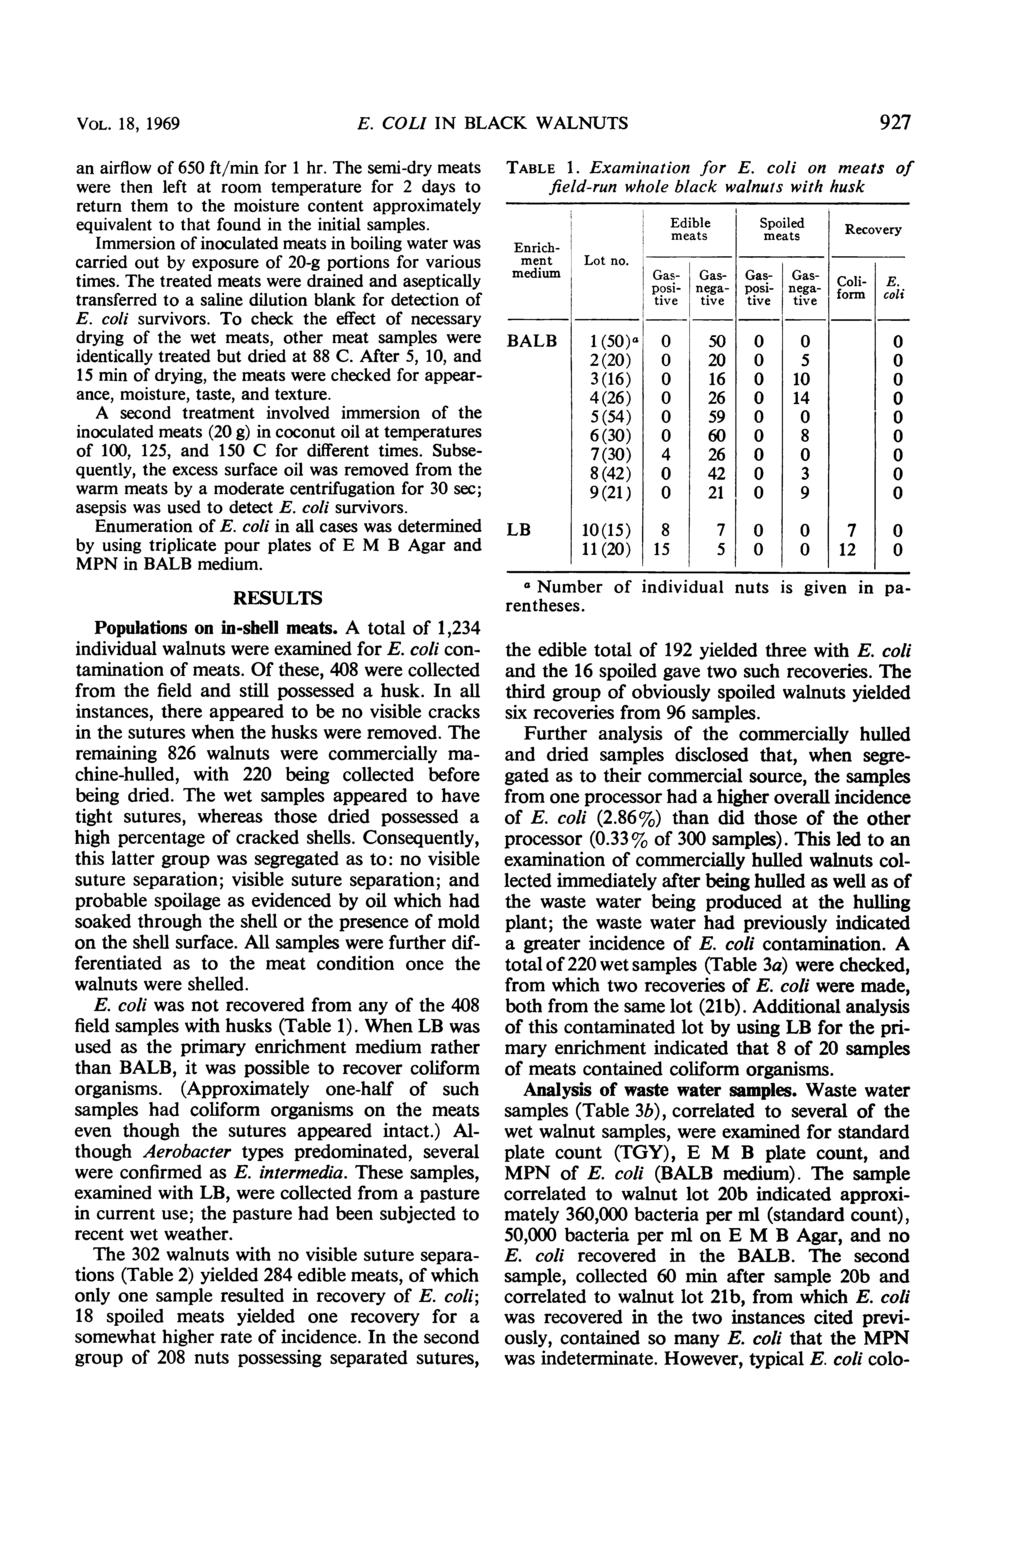 VOL. 18, 1969 E. COLI IN BLACK WALNUTS 927 an airflow of 650 ft/min for 1 hr.